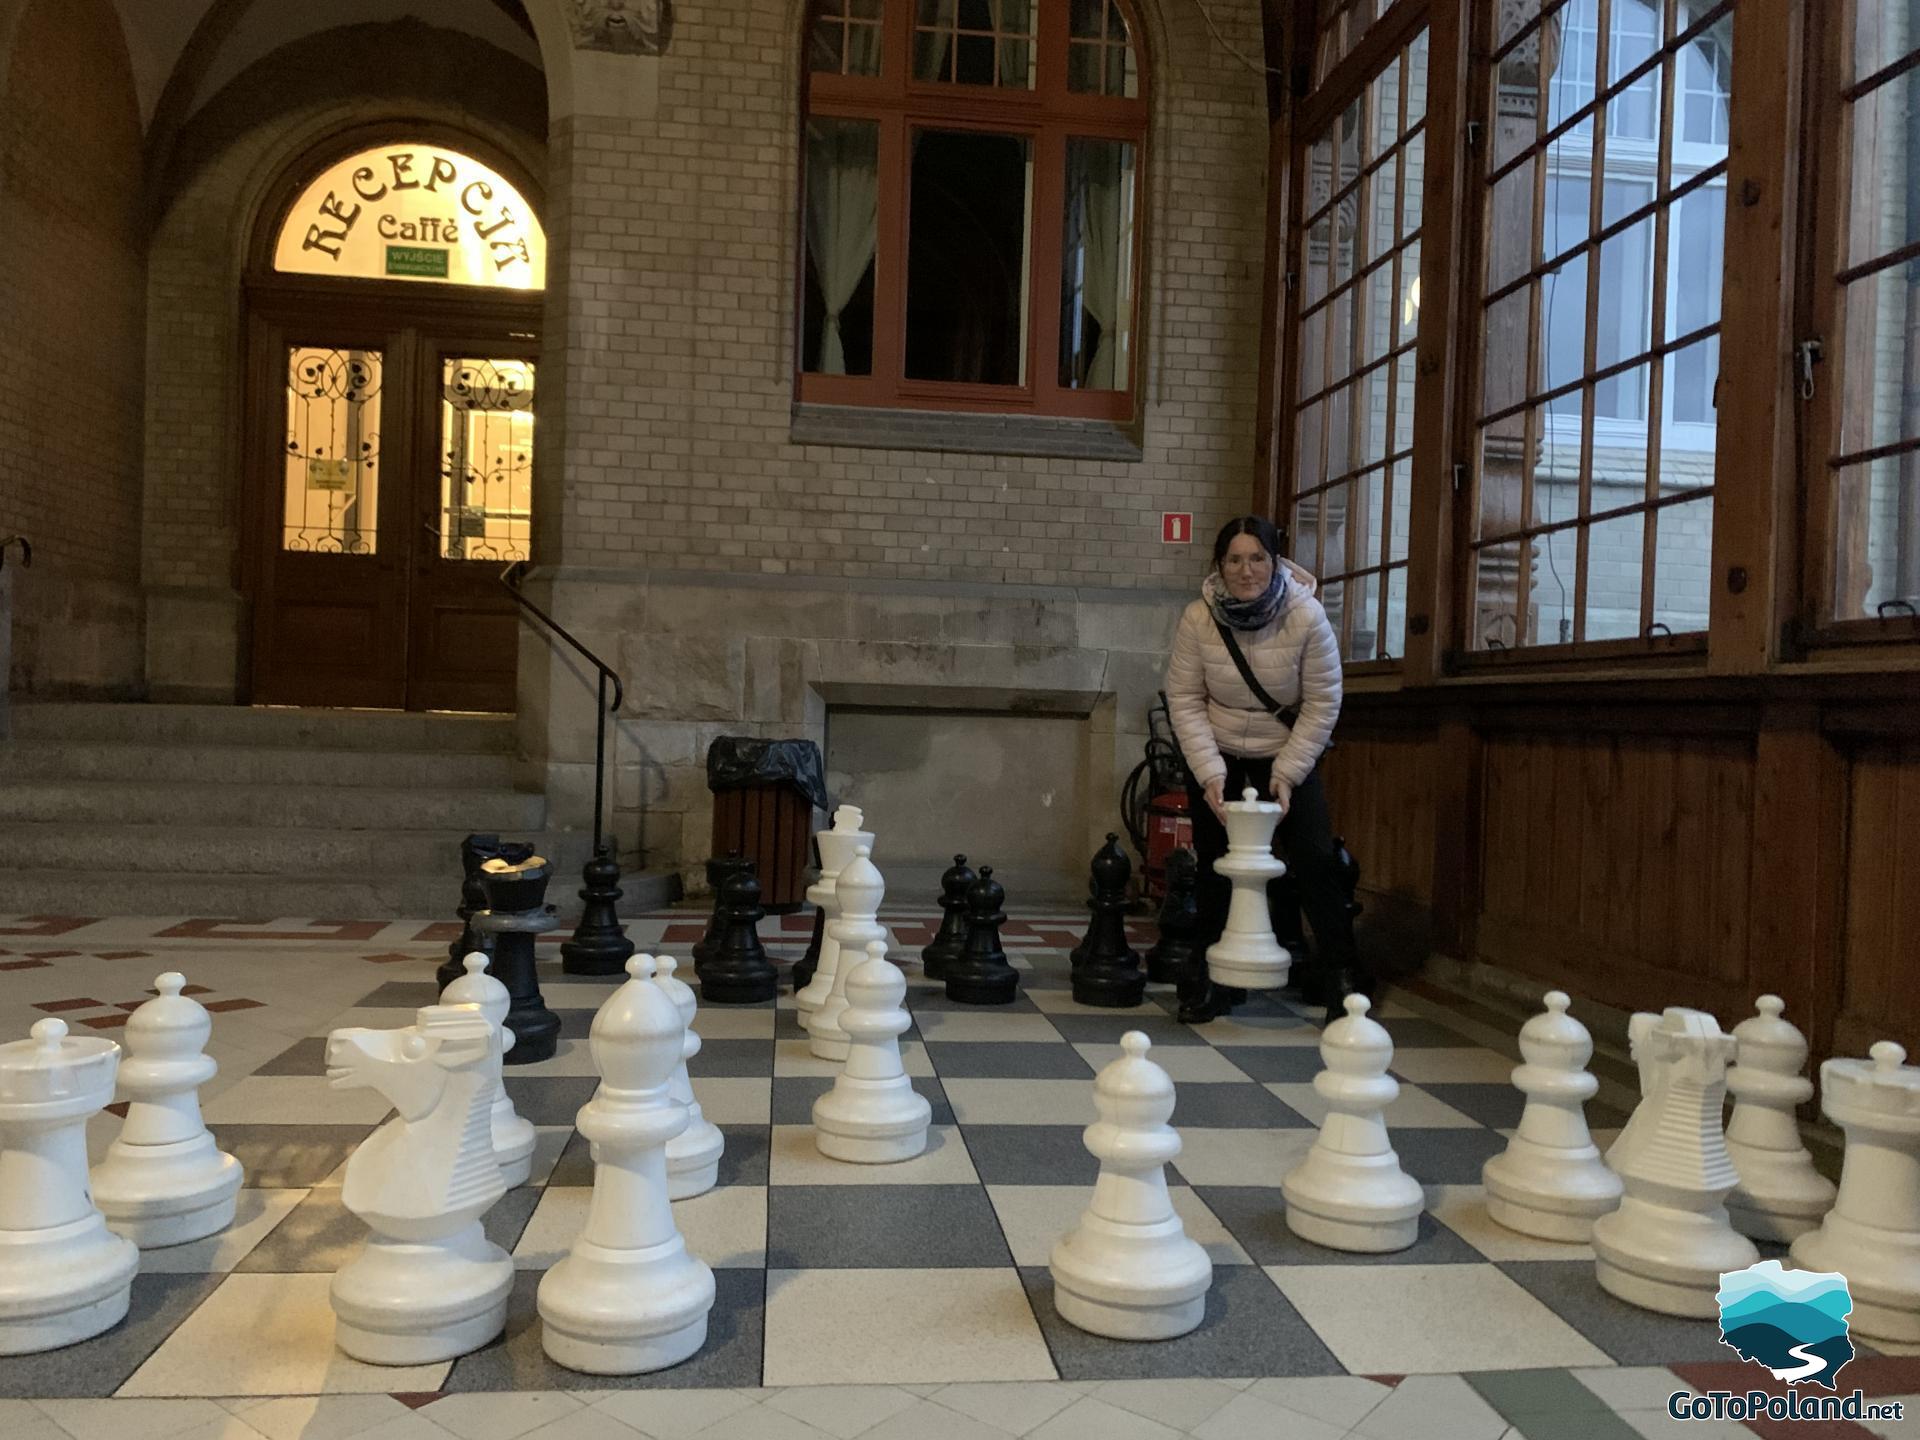 a woman is standing on a chessboard and picking up one white plastic chess piece